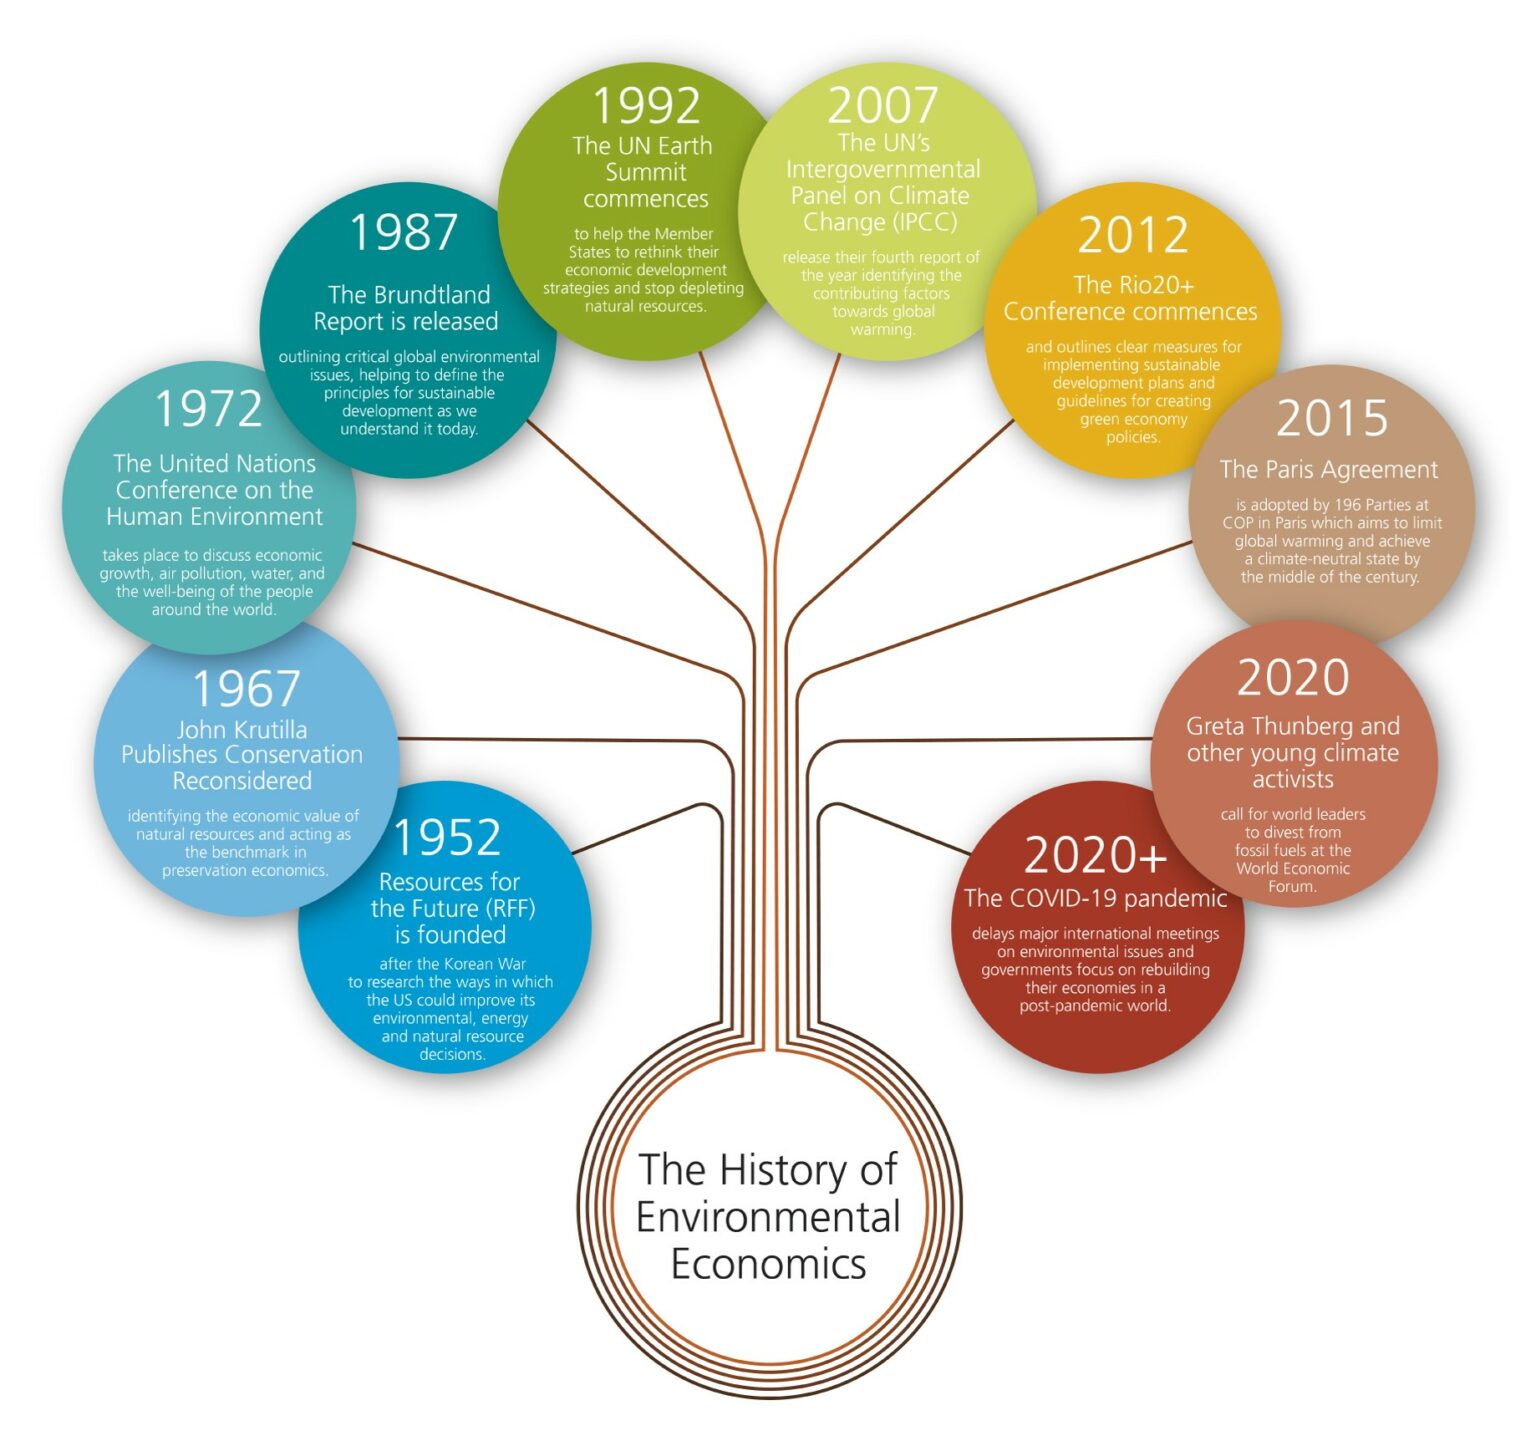 Discover The History Of Environmental Economics With This Complete Timeline Energy Live News